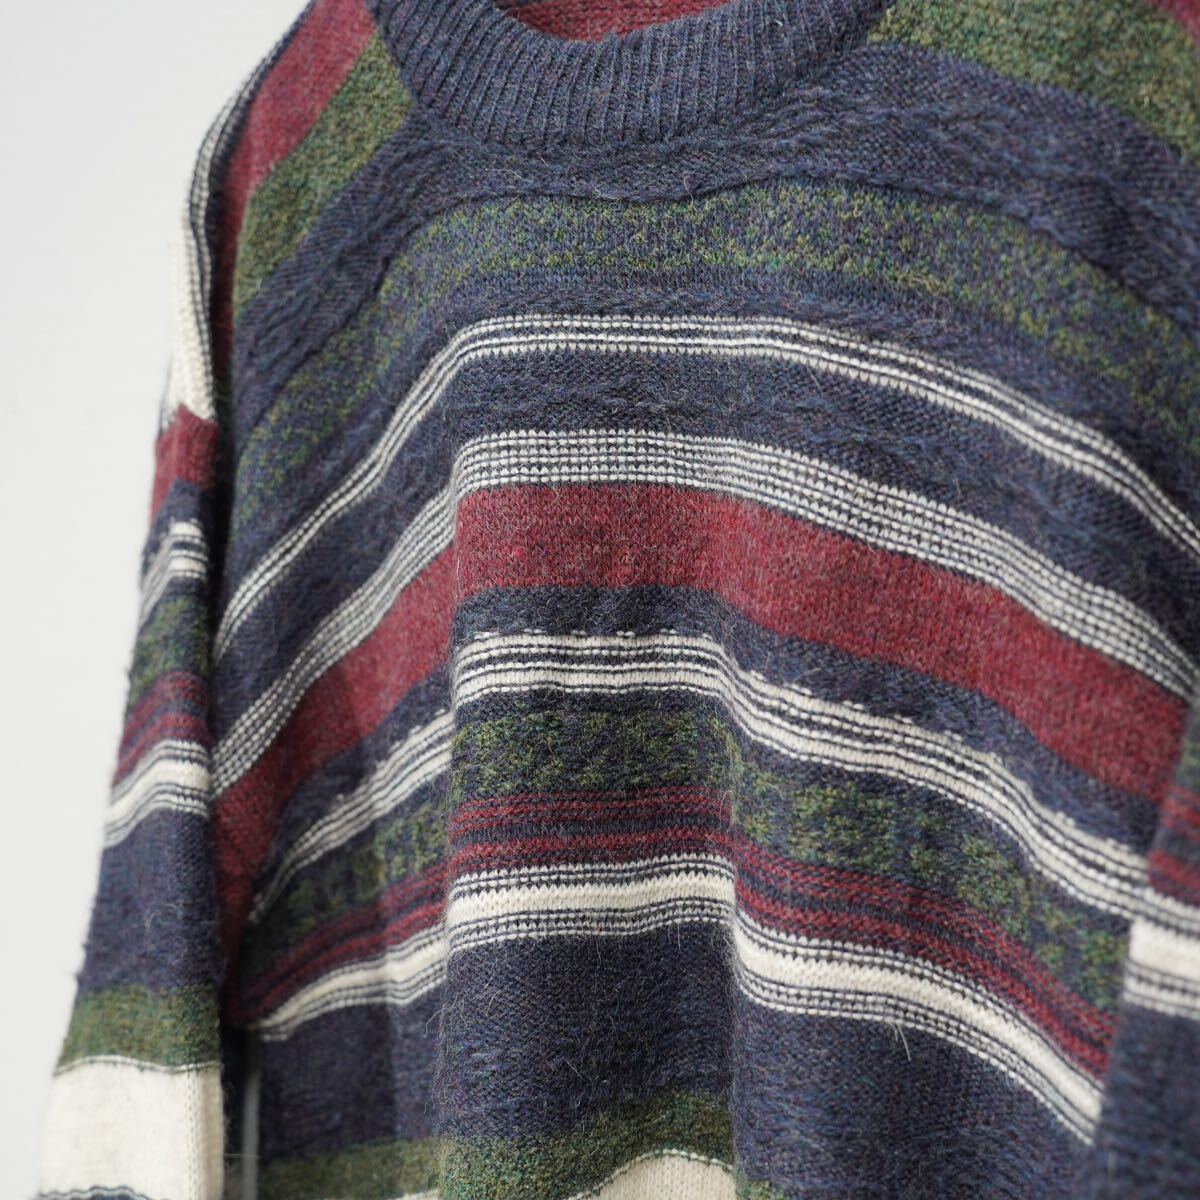 USA VINTAGE HAGGAR CASUALS PATTERNED DESIGN KNIT/アメリカ古着柄デザインニット